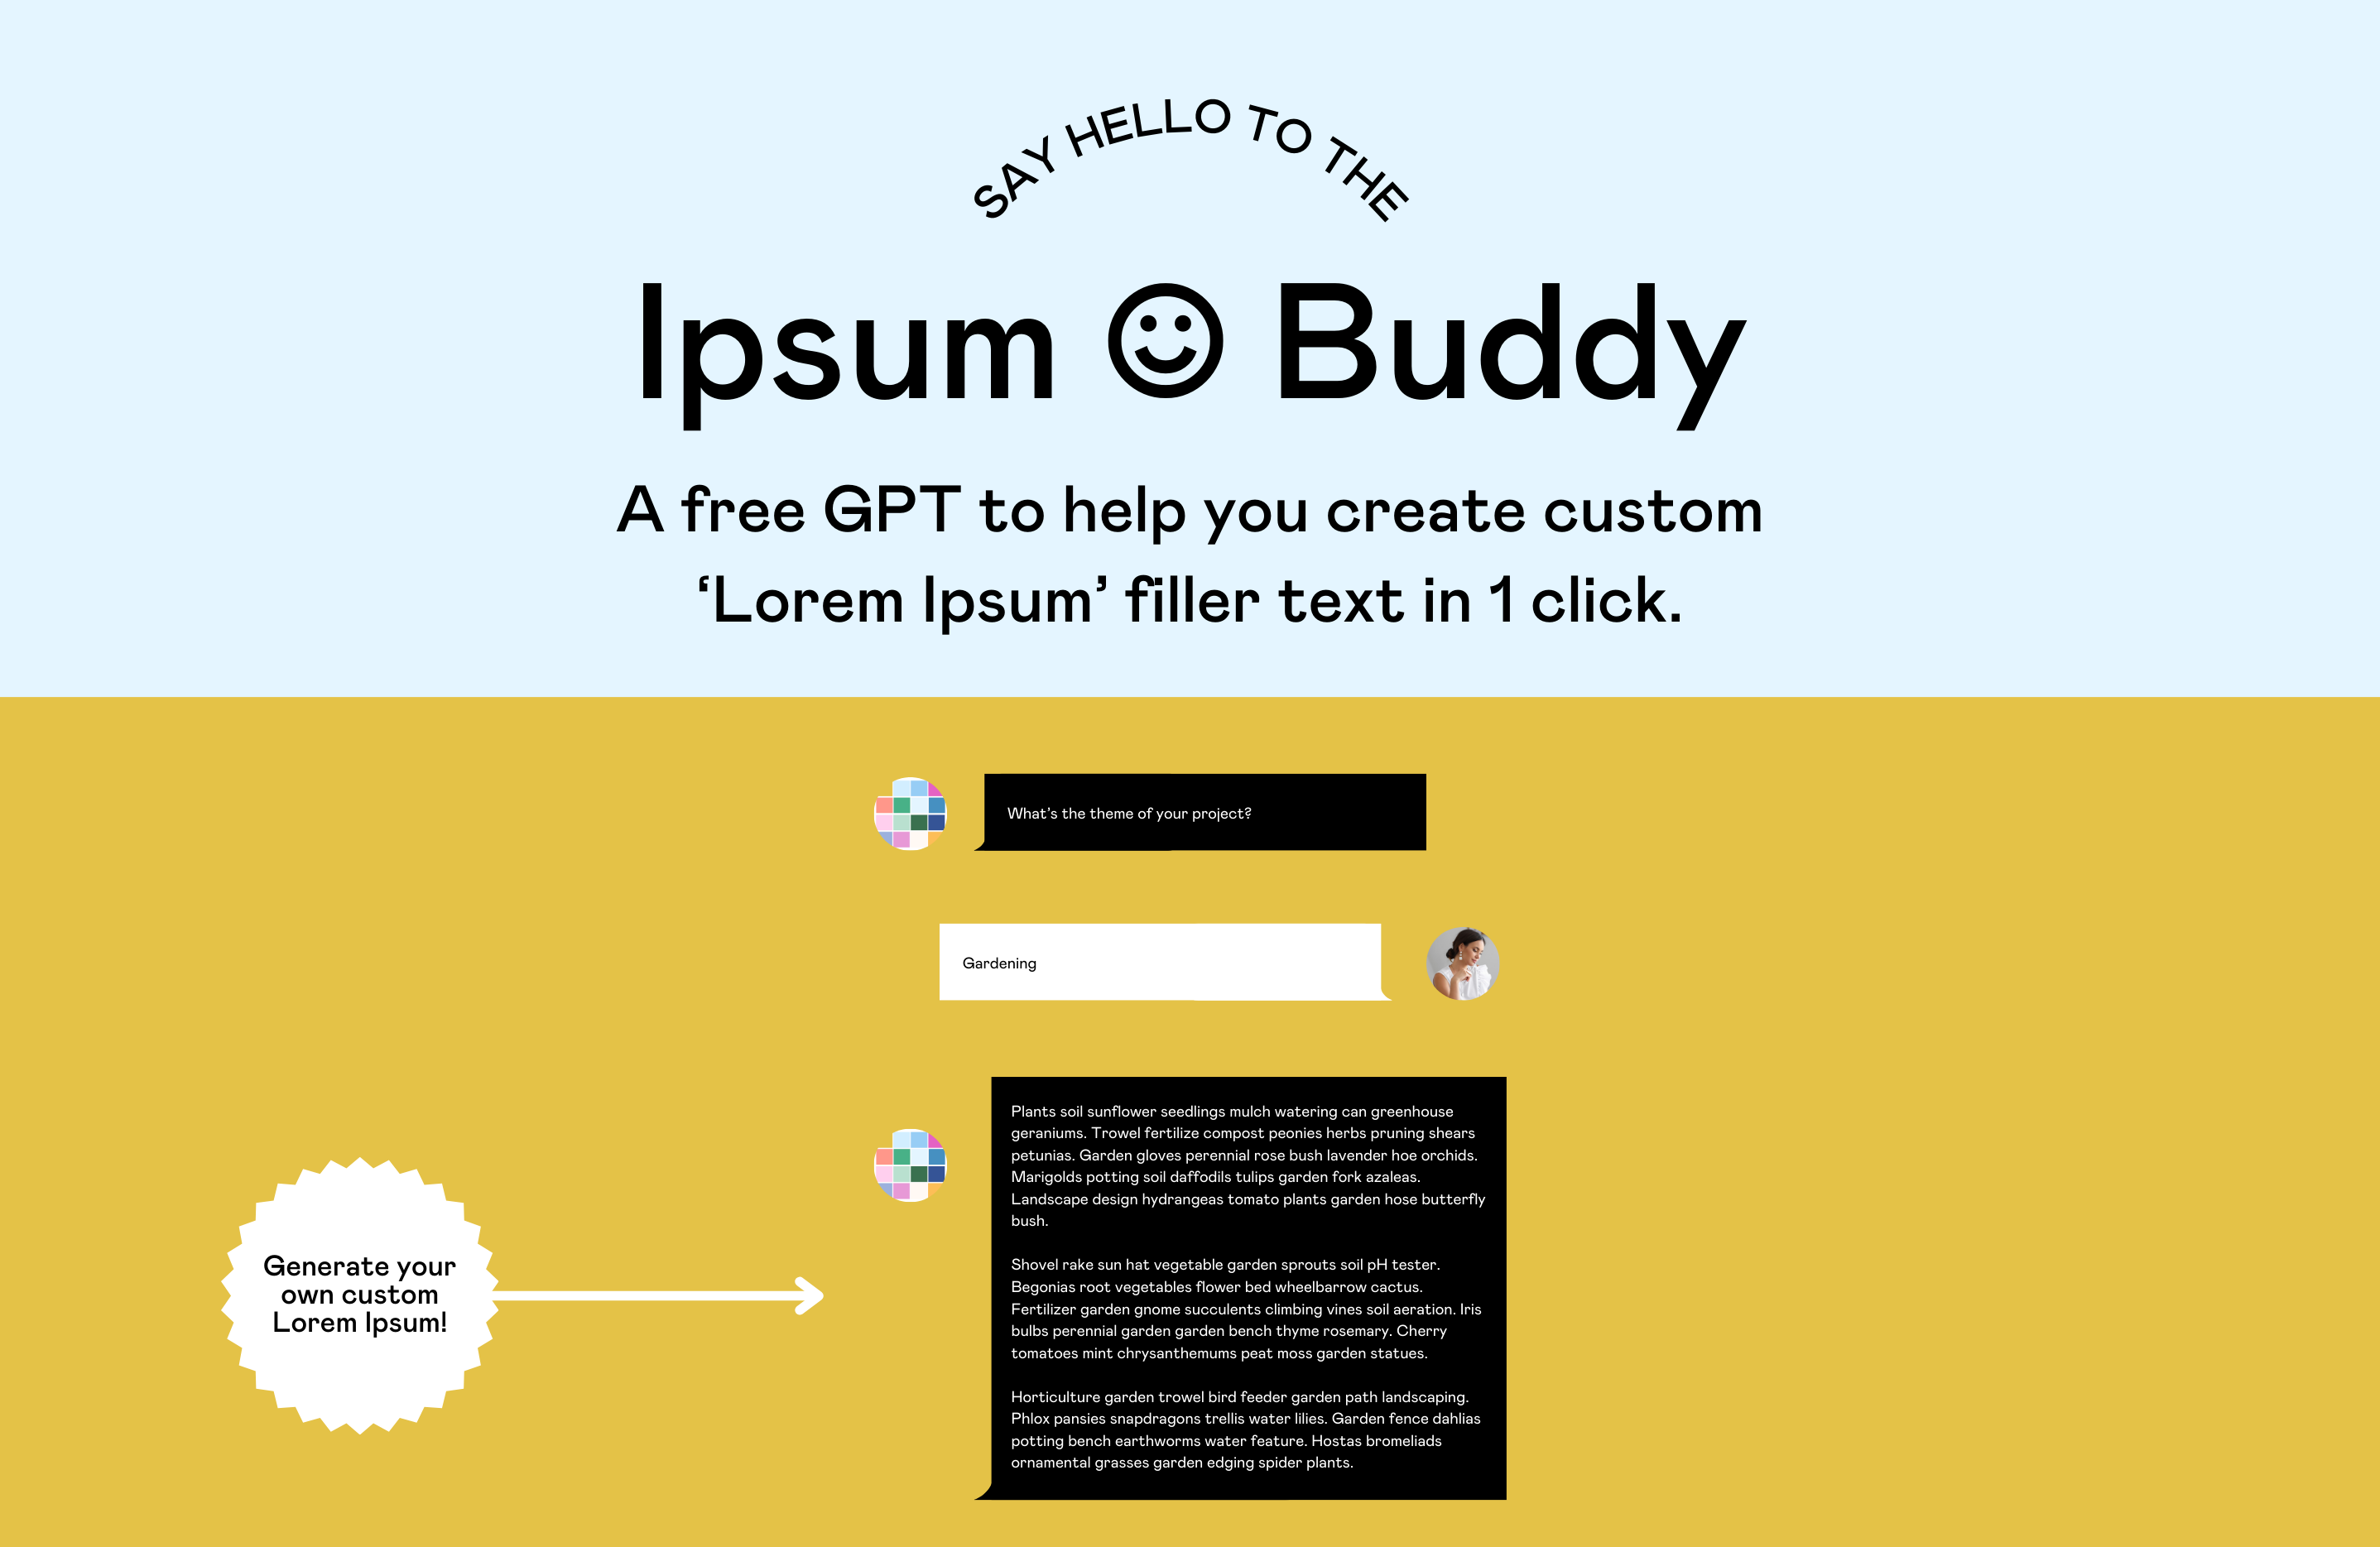 Text: 'Say Hello to the Ipsum Buddy: a gree GPT to help you create custom 'Lorem Ipsum' filler text in 1 click' with a screenshot of the GPT in action 